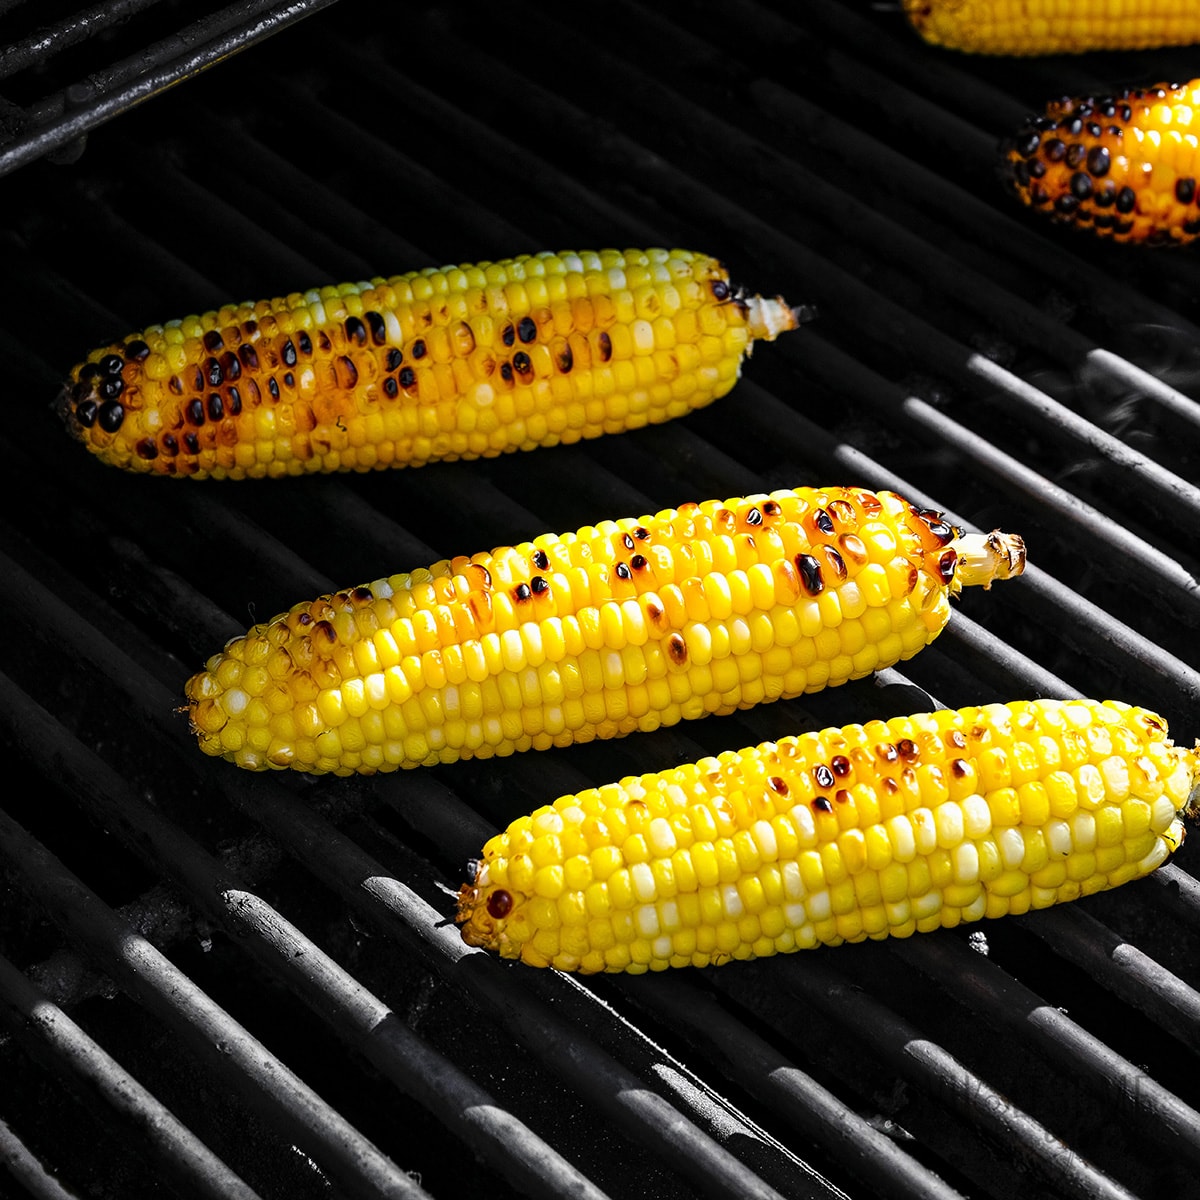 Grilled corn on grates.